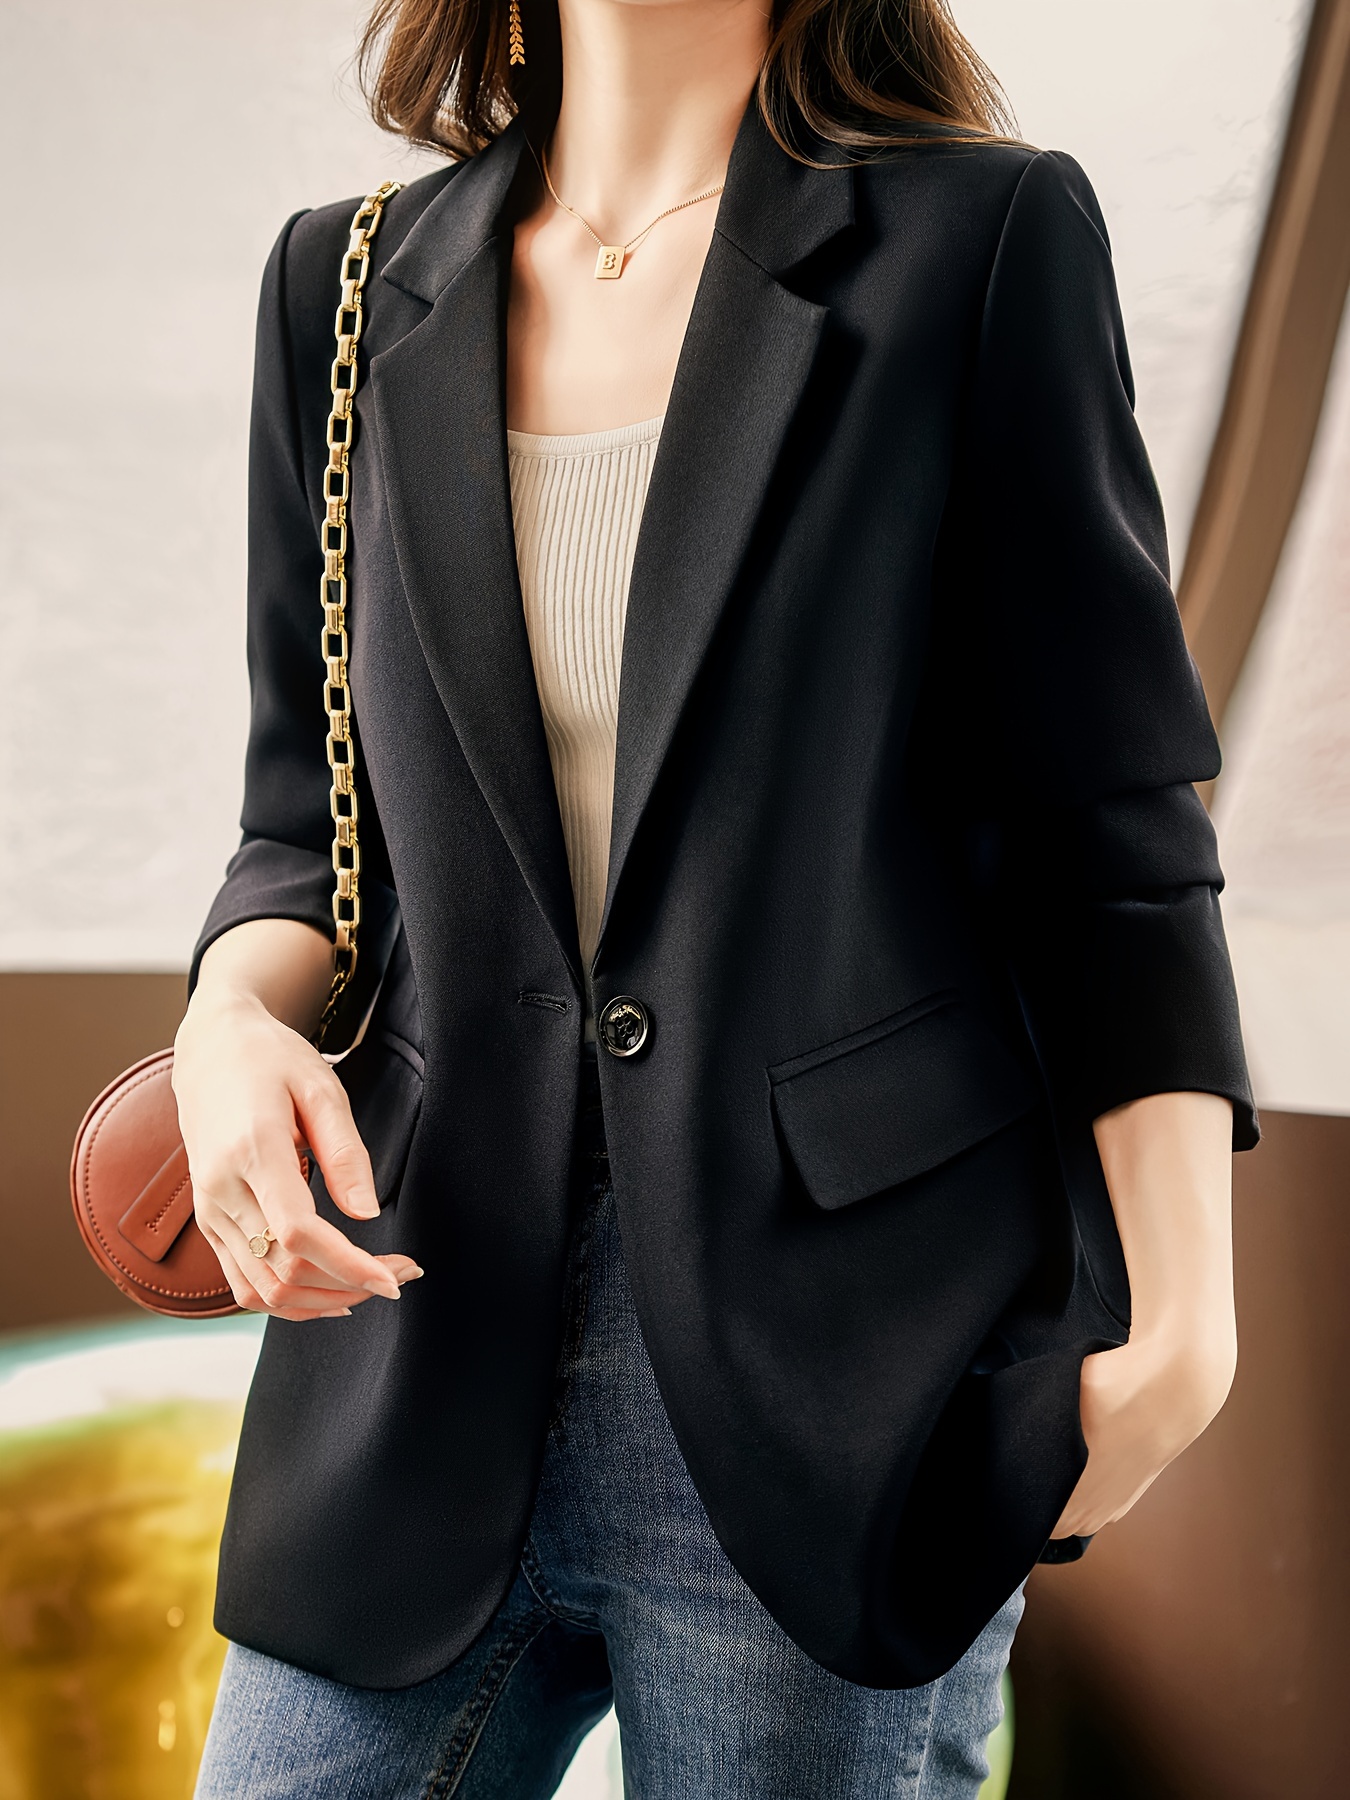 Notched Collar Button Front Blazer, Elegant Long Sleeve Blazer For Office & Work, Women s Clothing details 9